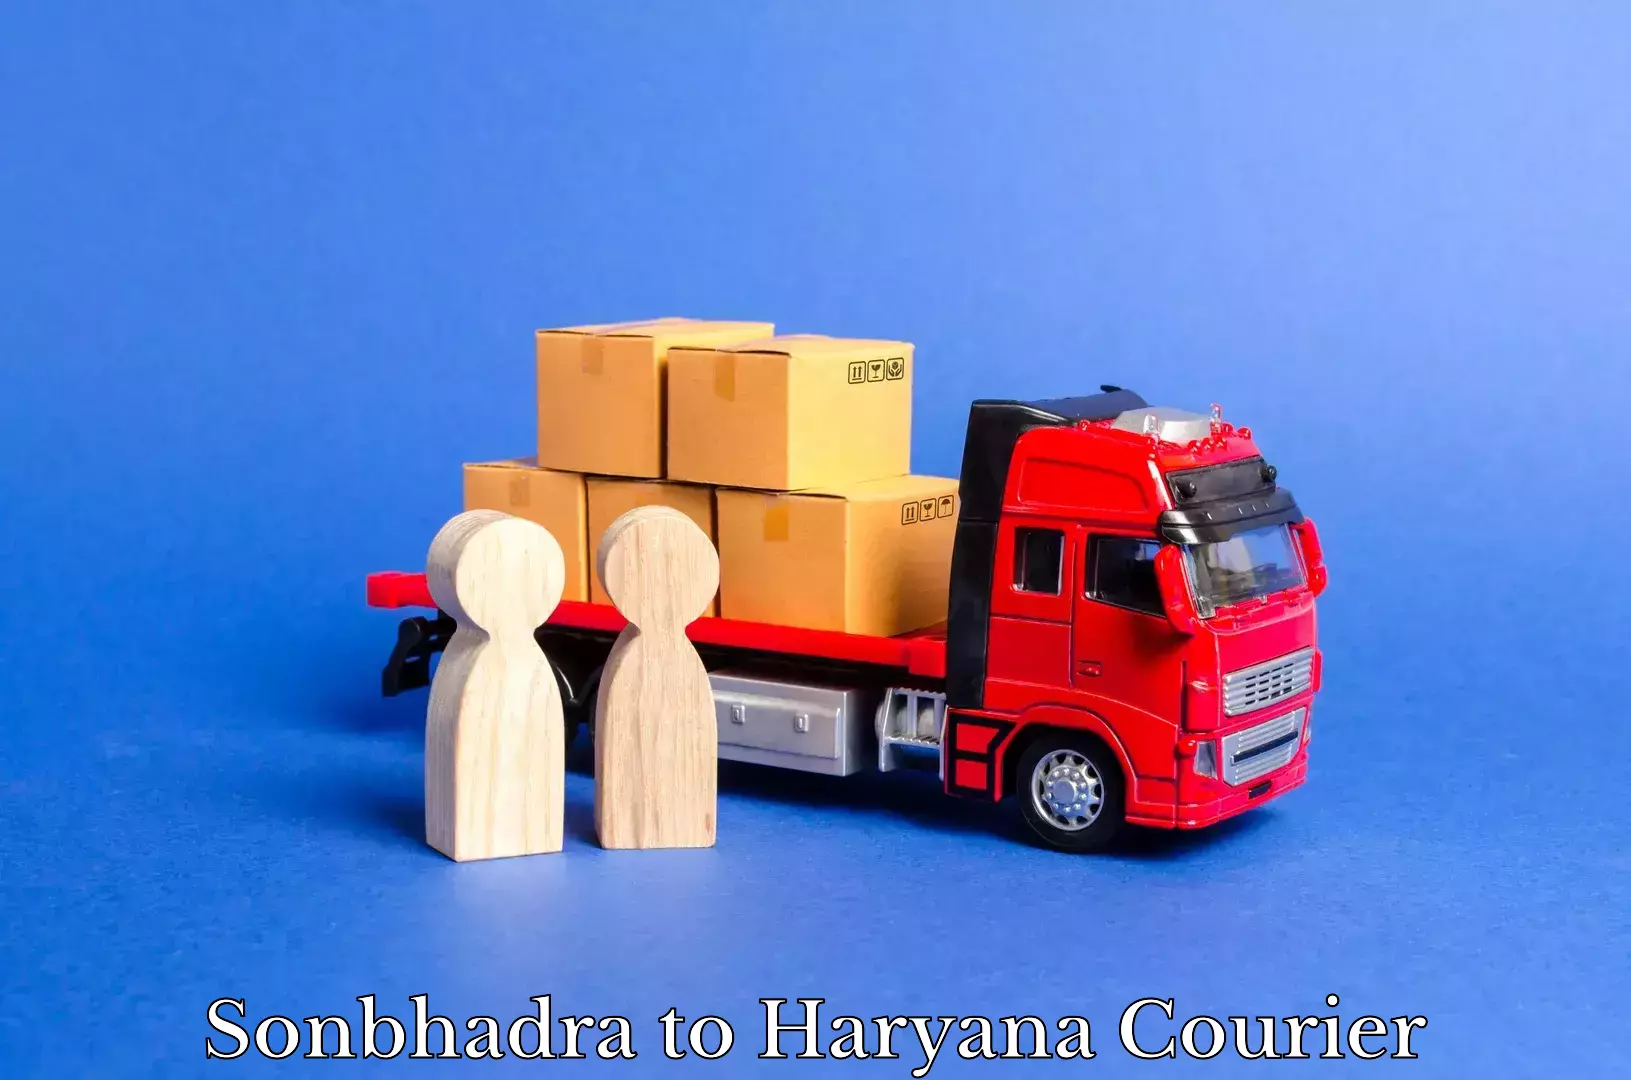 Local delivery service Sonbhadra to Haryana